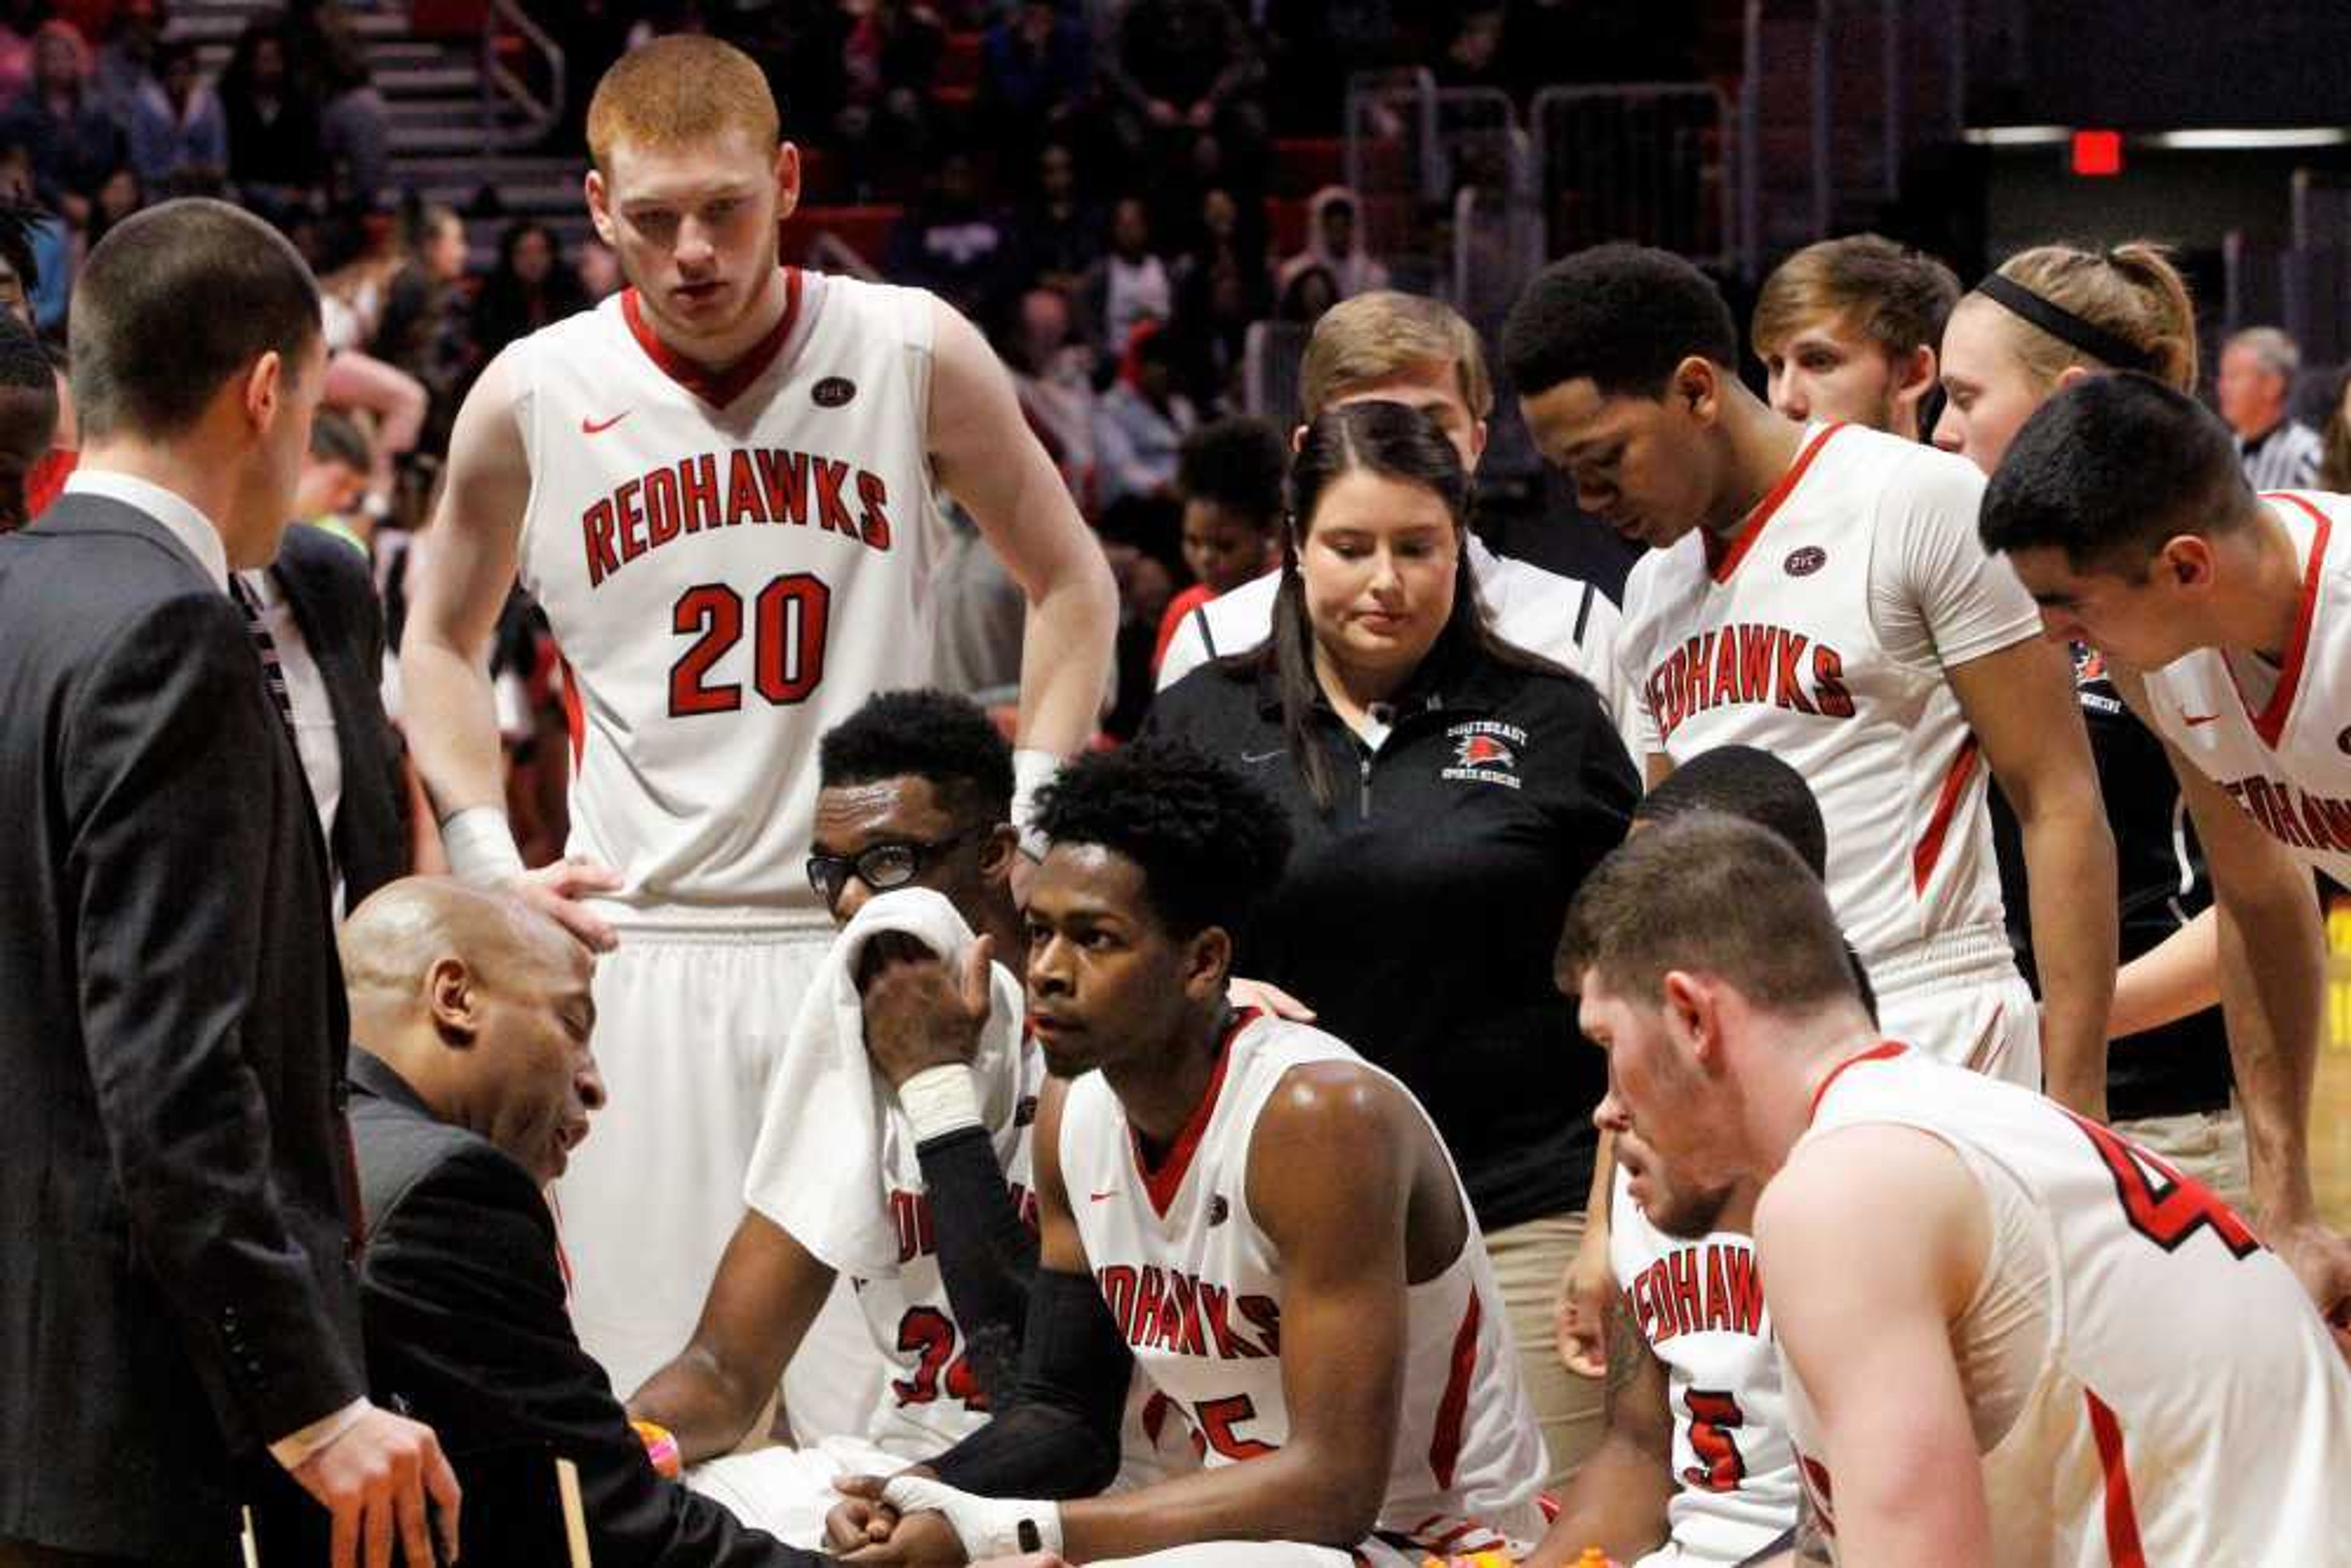 Future looks bright for Southeast men's basketball